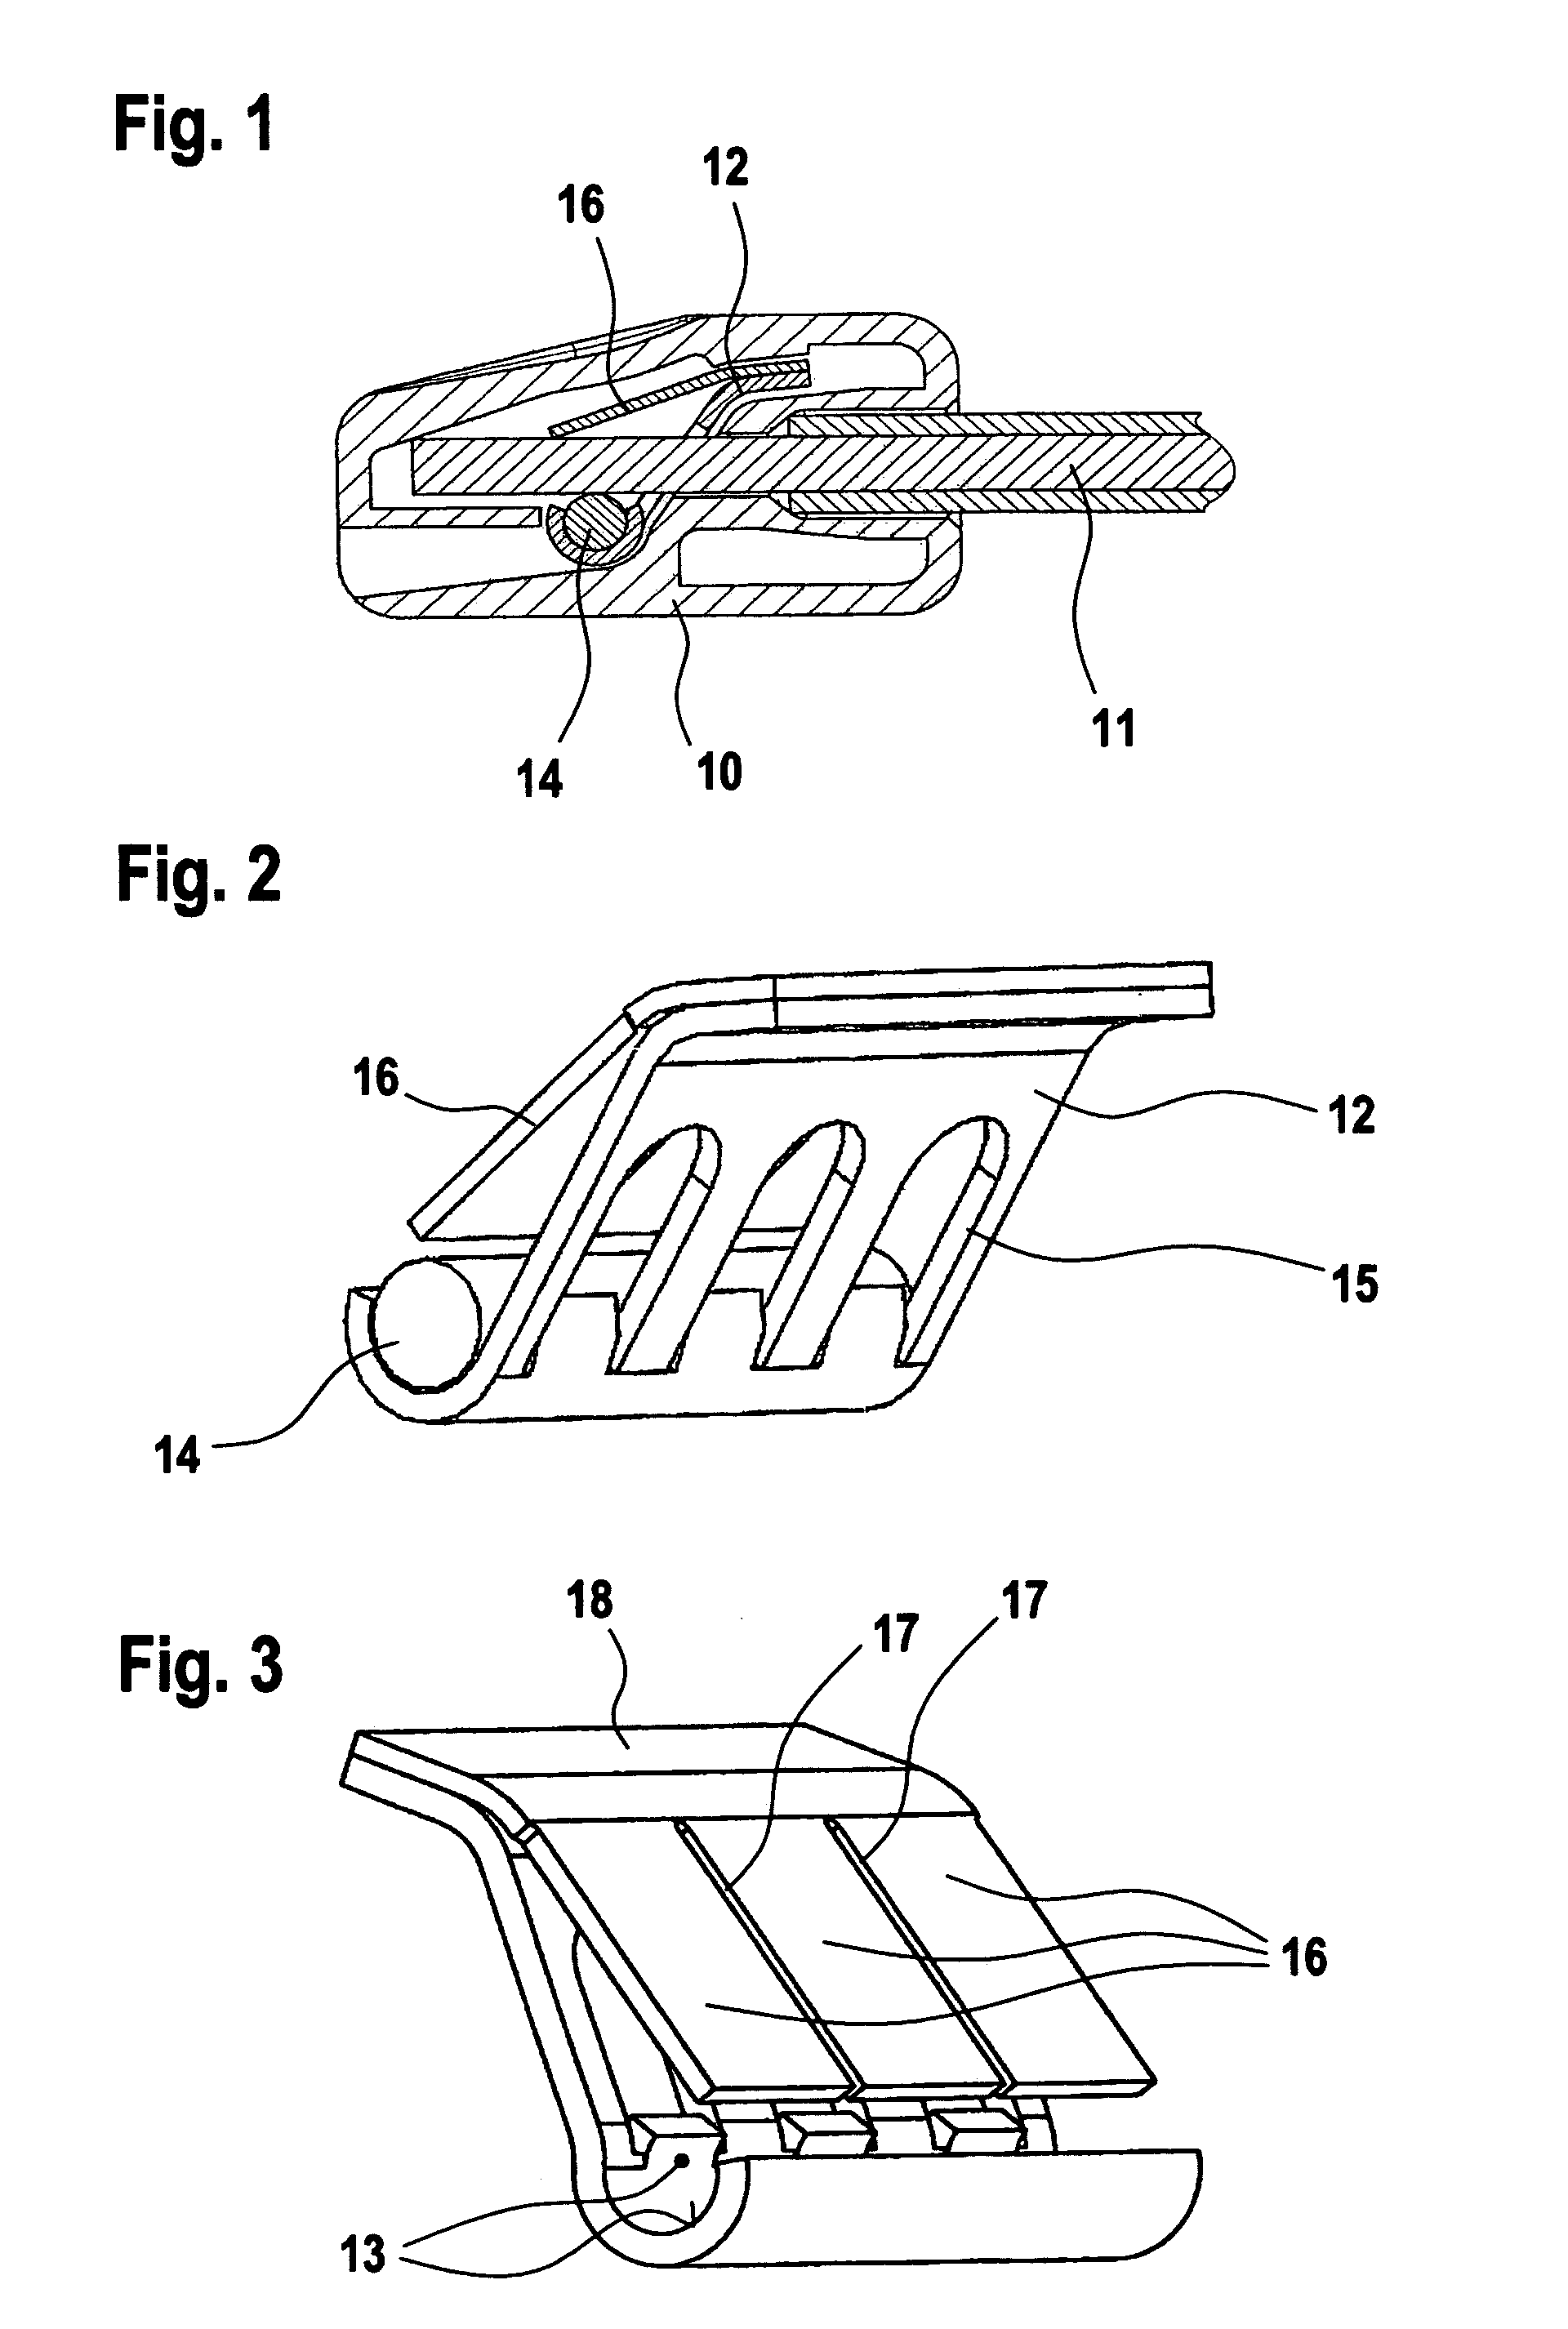 Clamp terminal for connecting electrical conductors